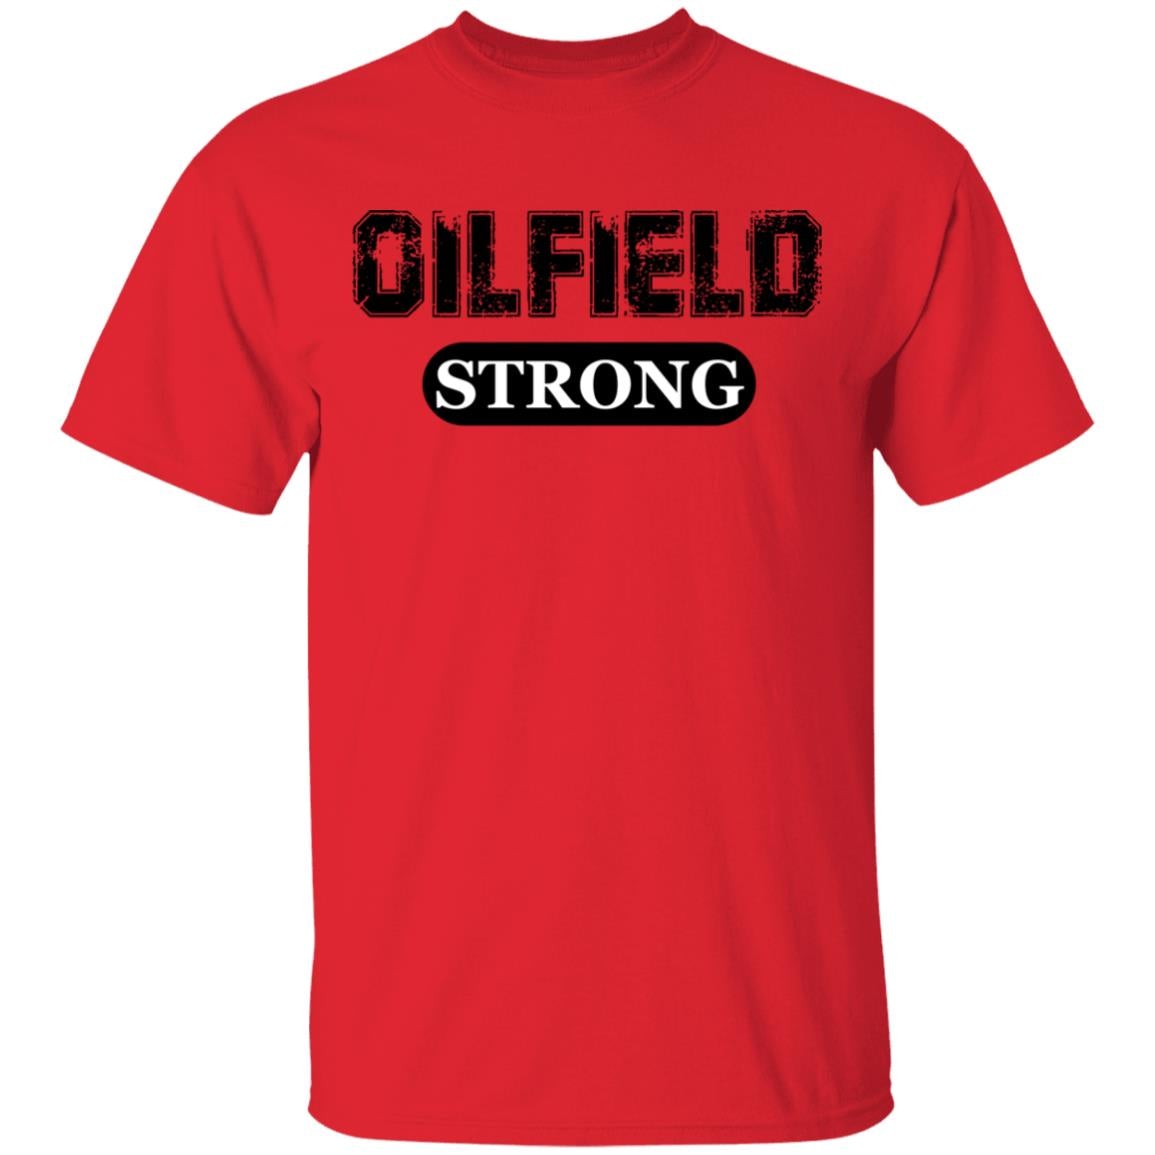 Oilfield Strong T-Shirt - Red - Loyalty Vibes